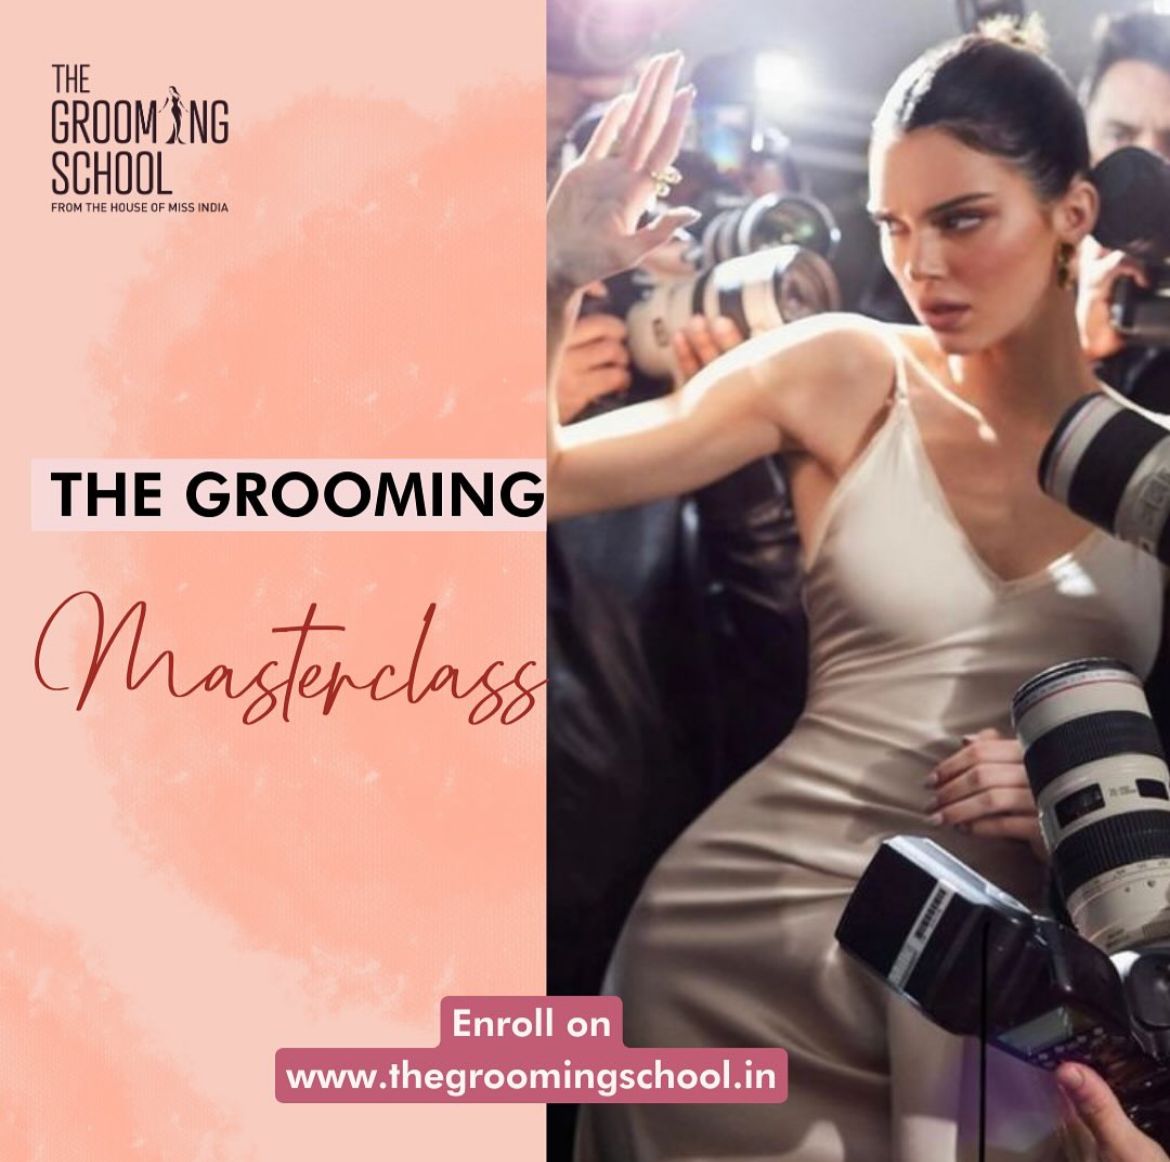 You owe it to your future self to be your best version! ❤️

Reach your full potential now, register at thegroomingschool.in 🫶🏻
#BeautyPageants #Grooming #Coach